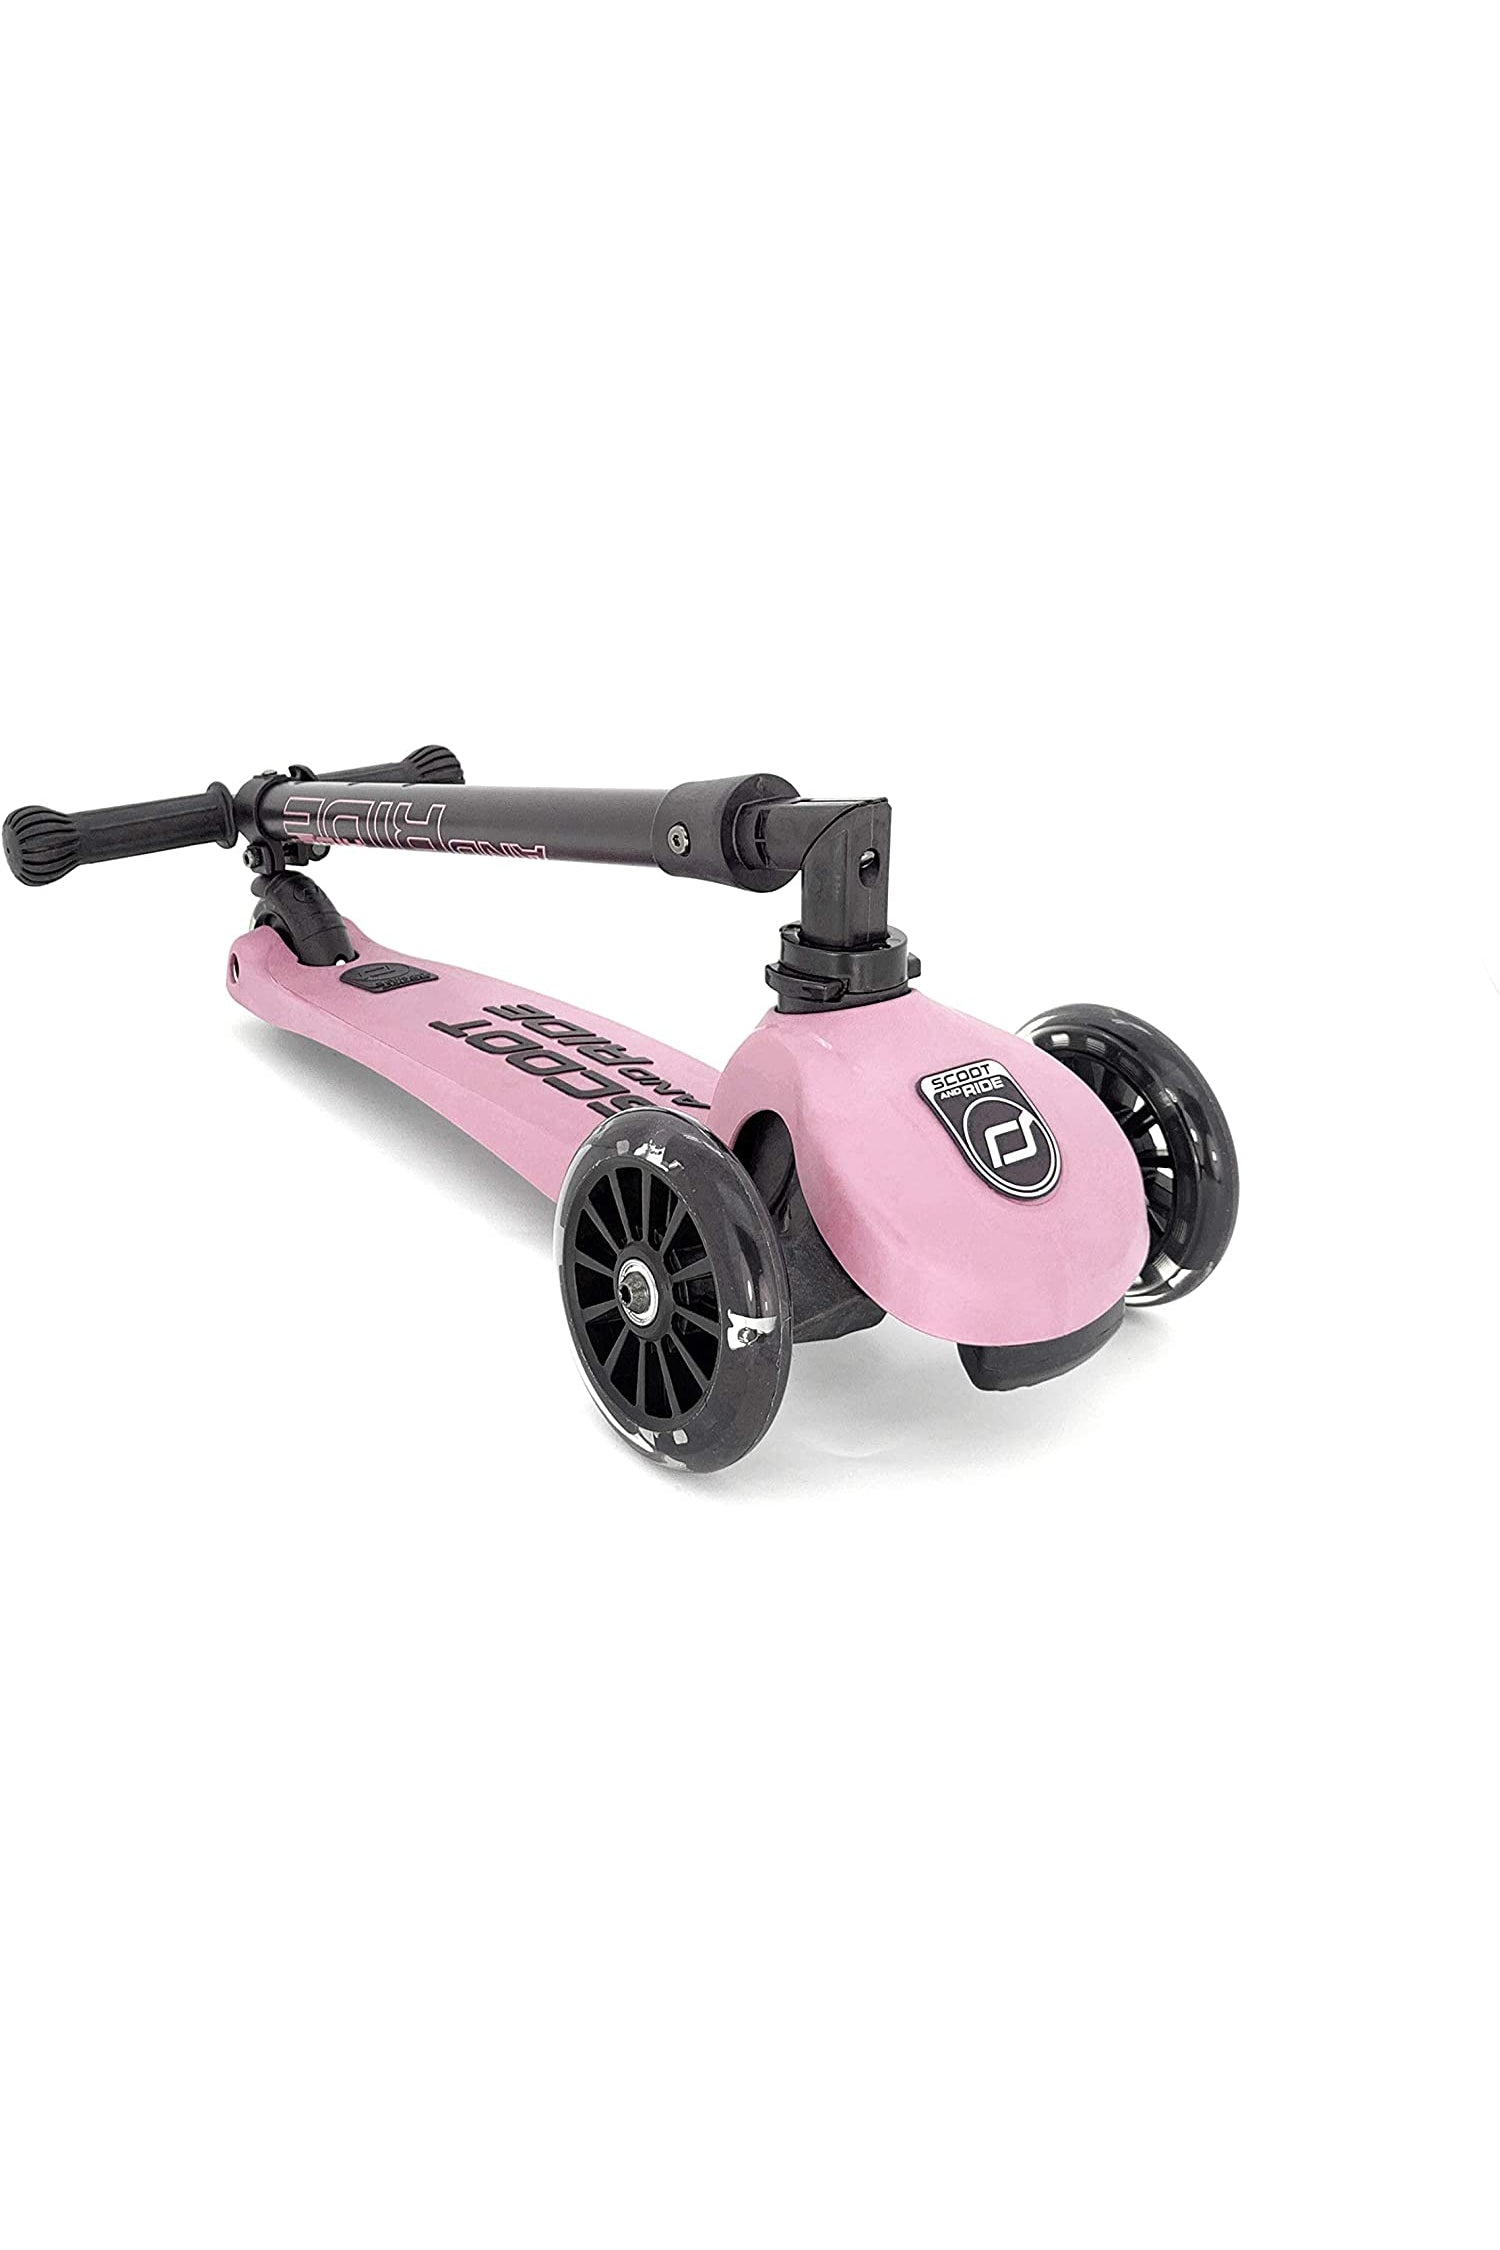 and Ride Standing Scooter 3 – Blickenstaffs Toy Store